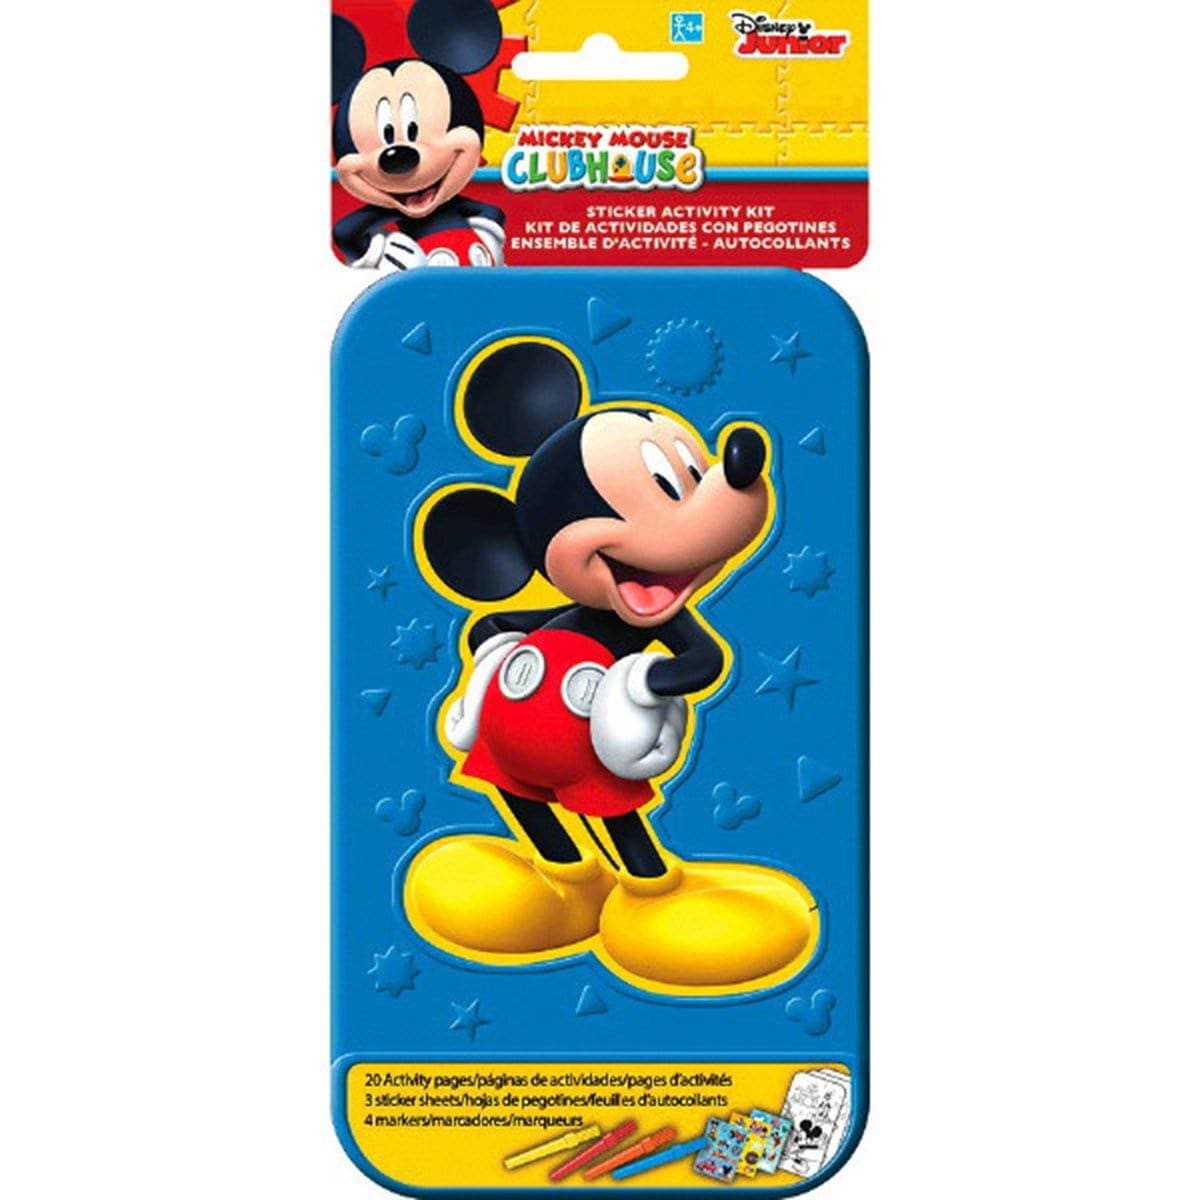 Buy Kids Birthday Mickey Mouse sticker activity kit sold at Party Expert